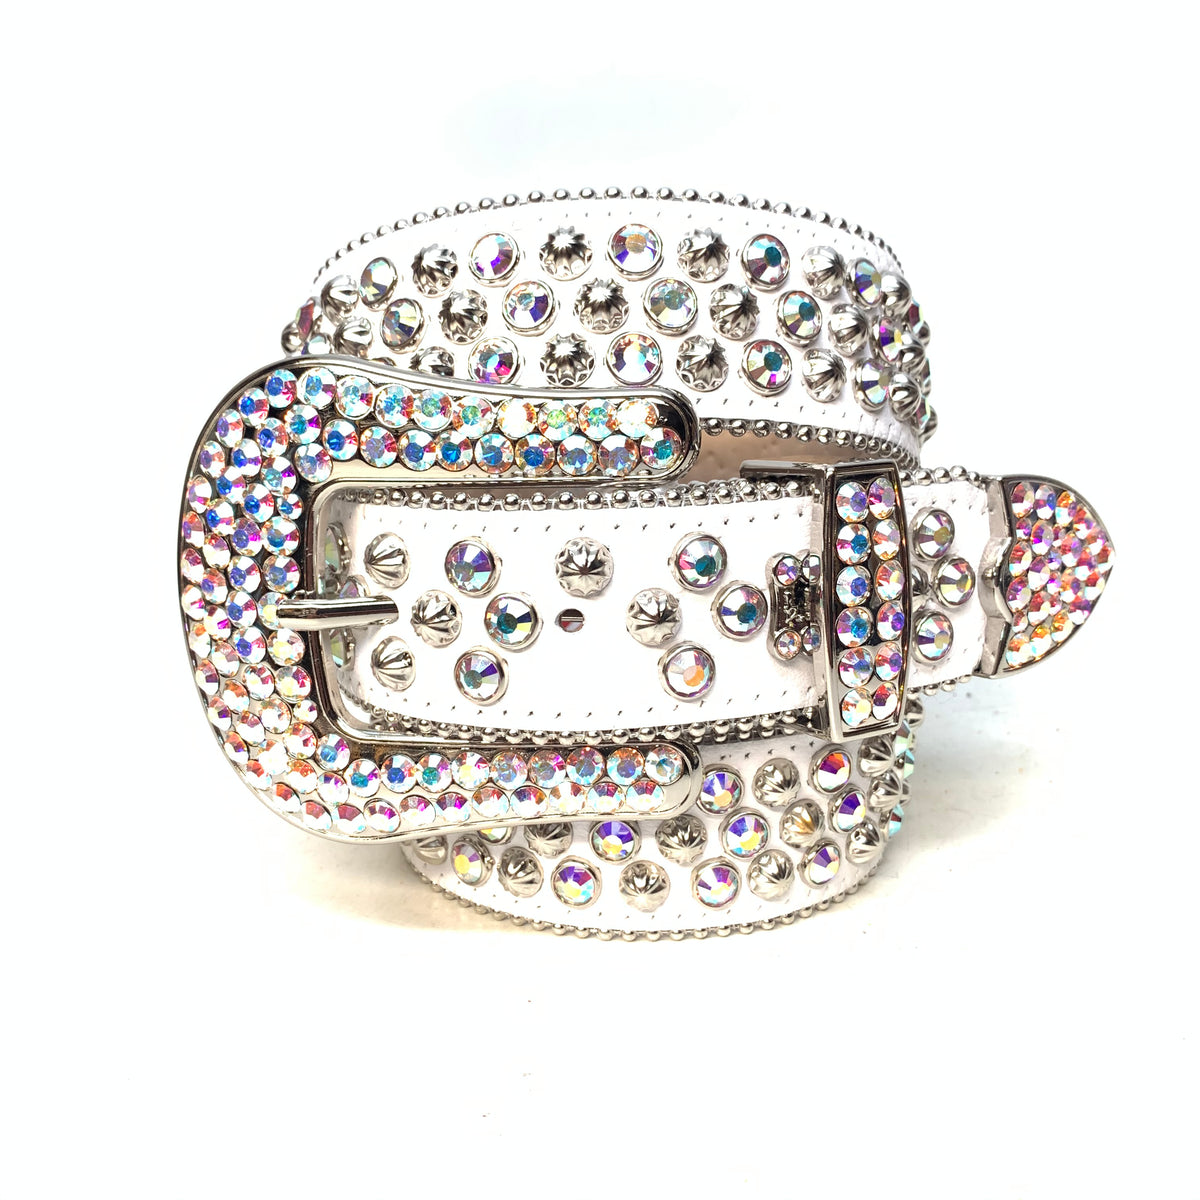 bb simon Leather Belt With 3 Rows Of Large Swarovski Crystals